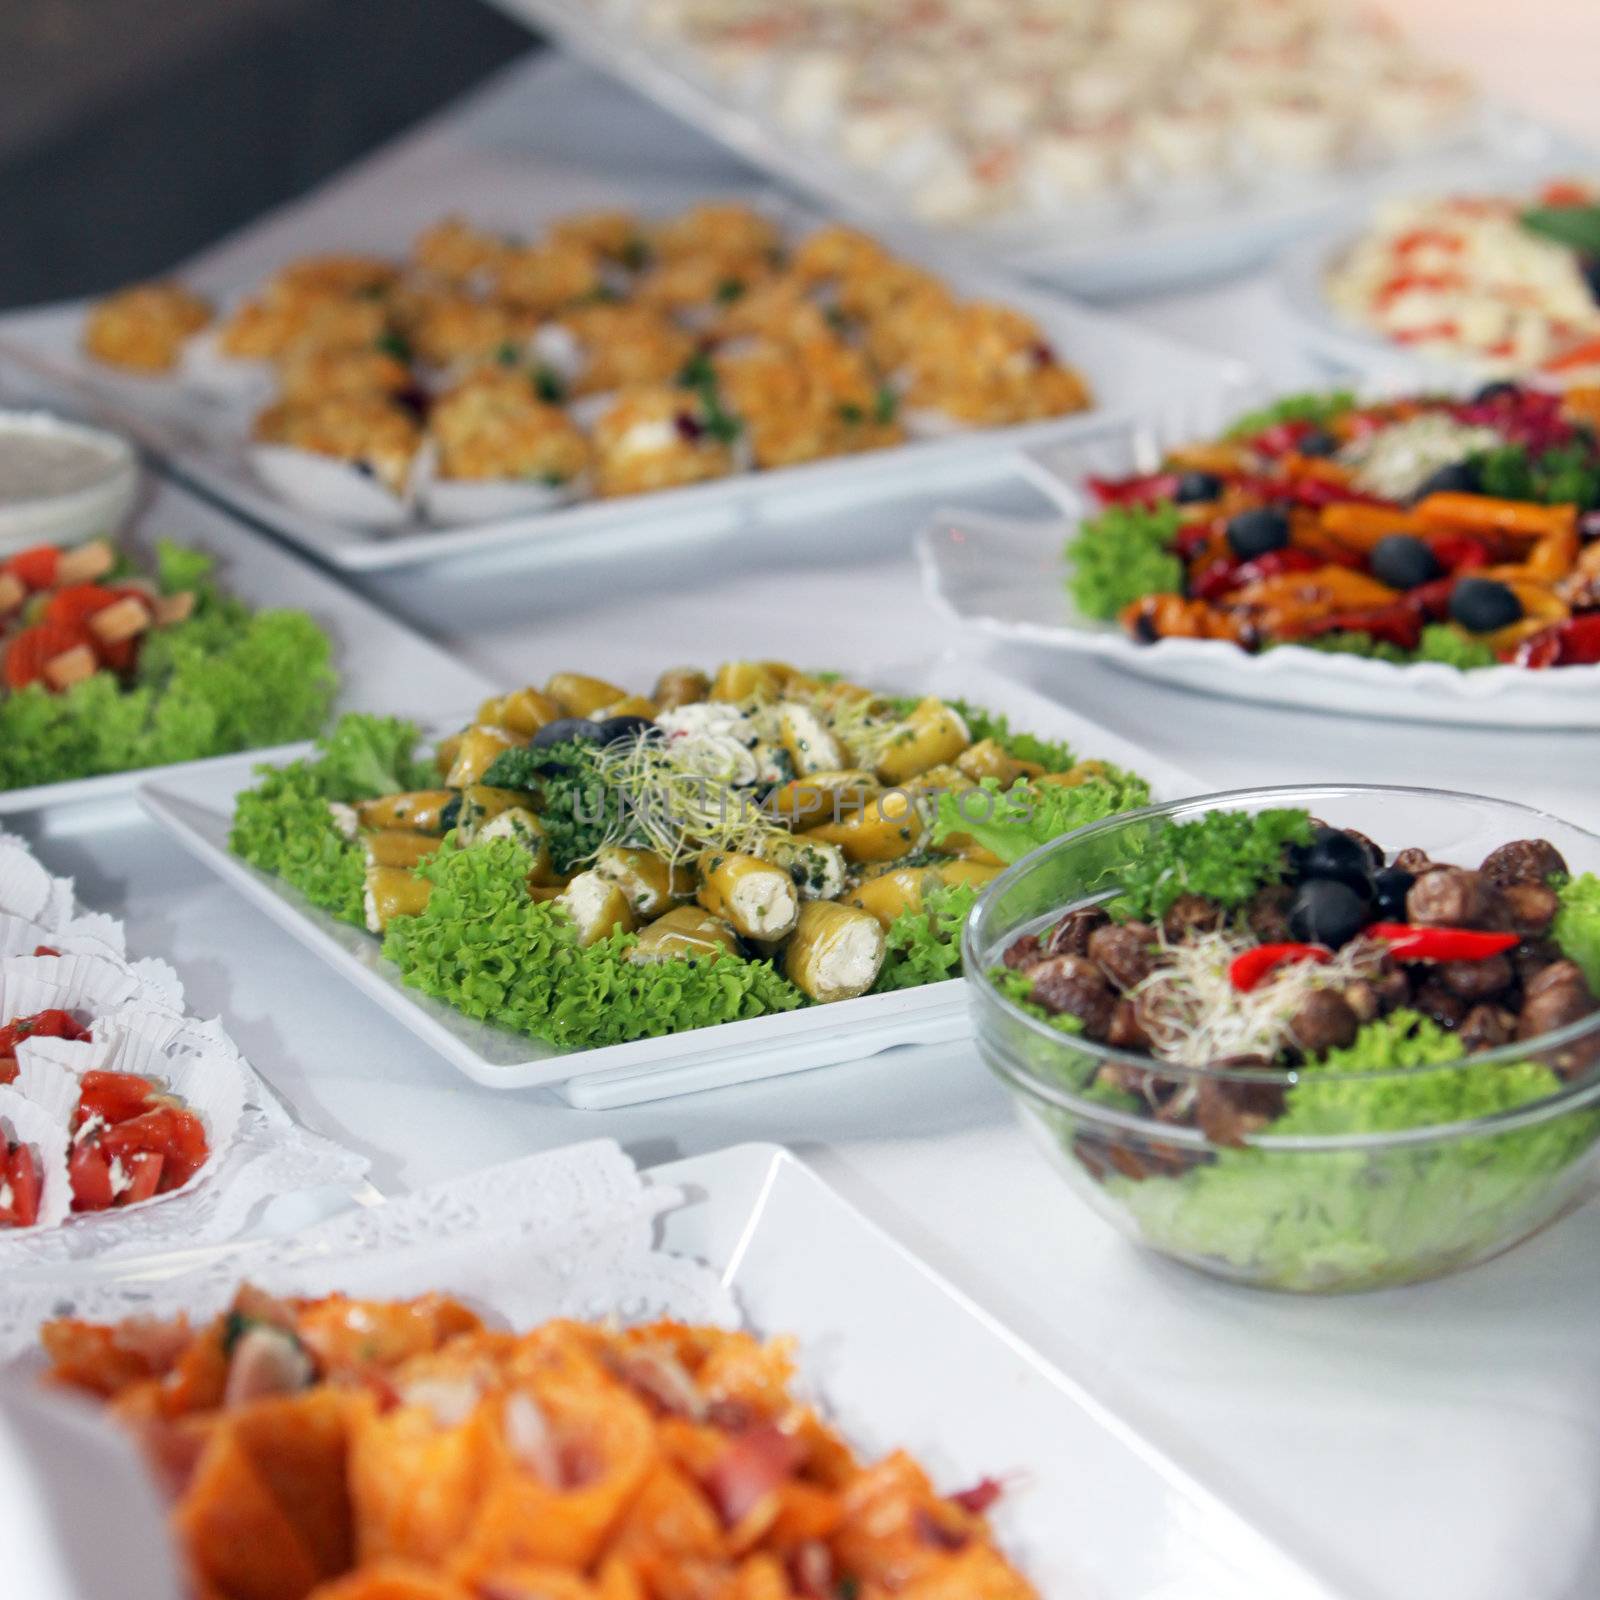 Variety of cold vegetable platters on a buffet table at a catered event or wedding reception